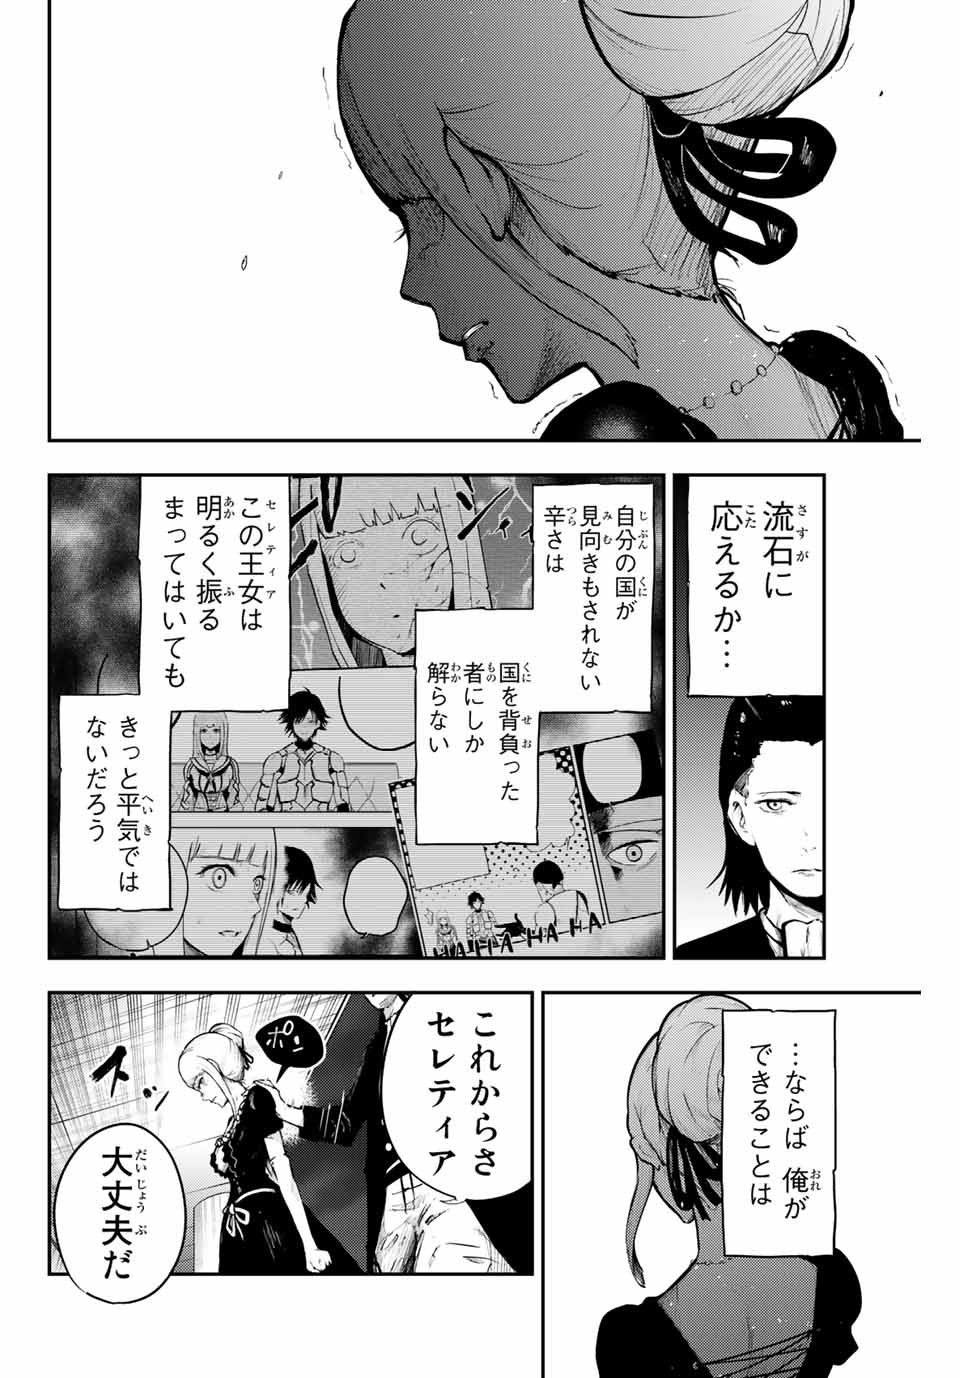 the strongest former prince-; 奴隷転生 ～その奴隷、最強の元王子につき～ 第15話 - Page 8